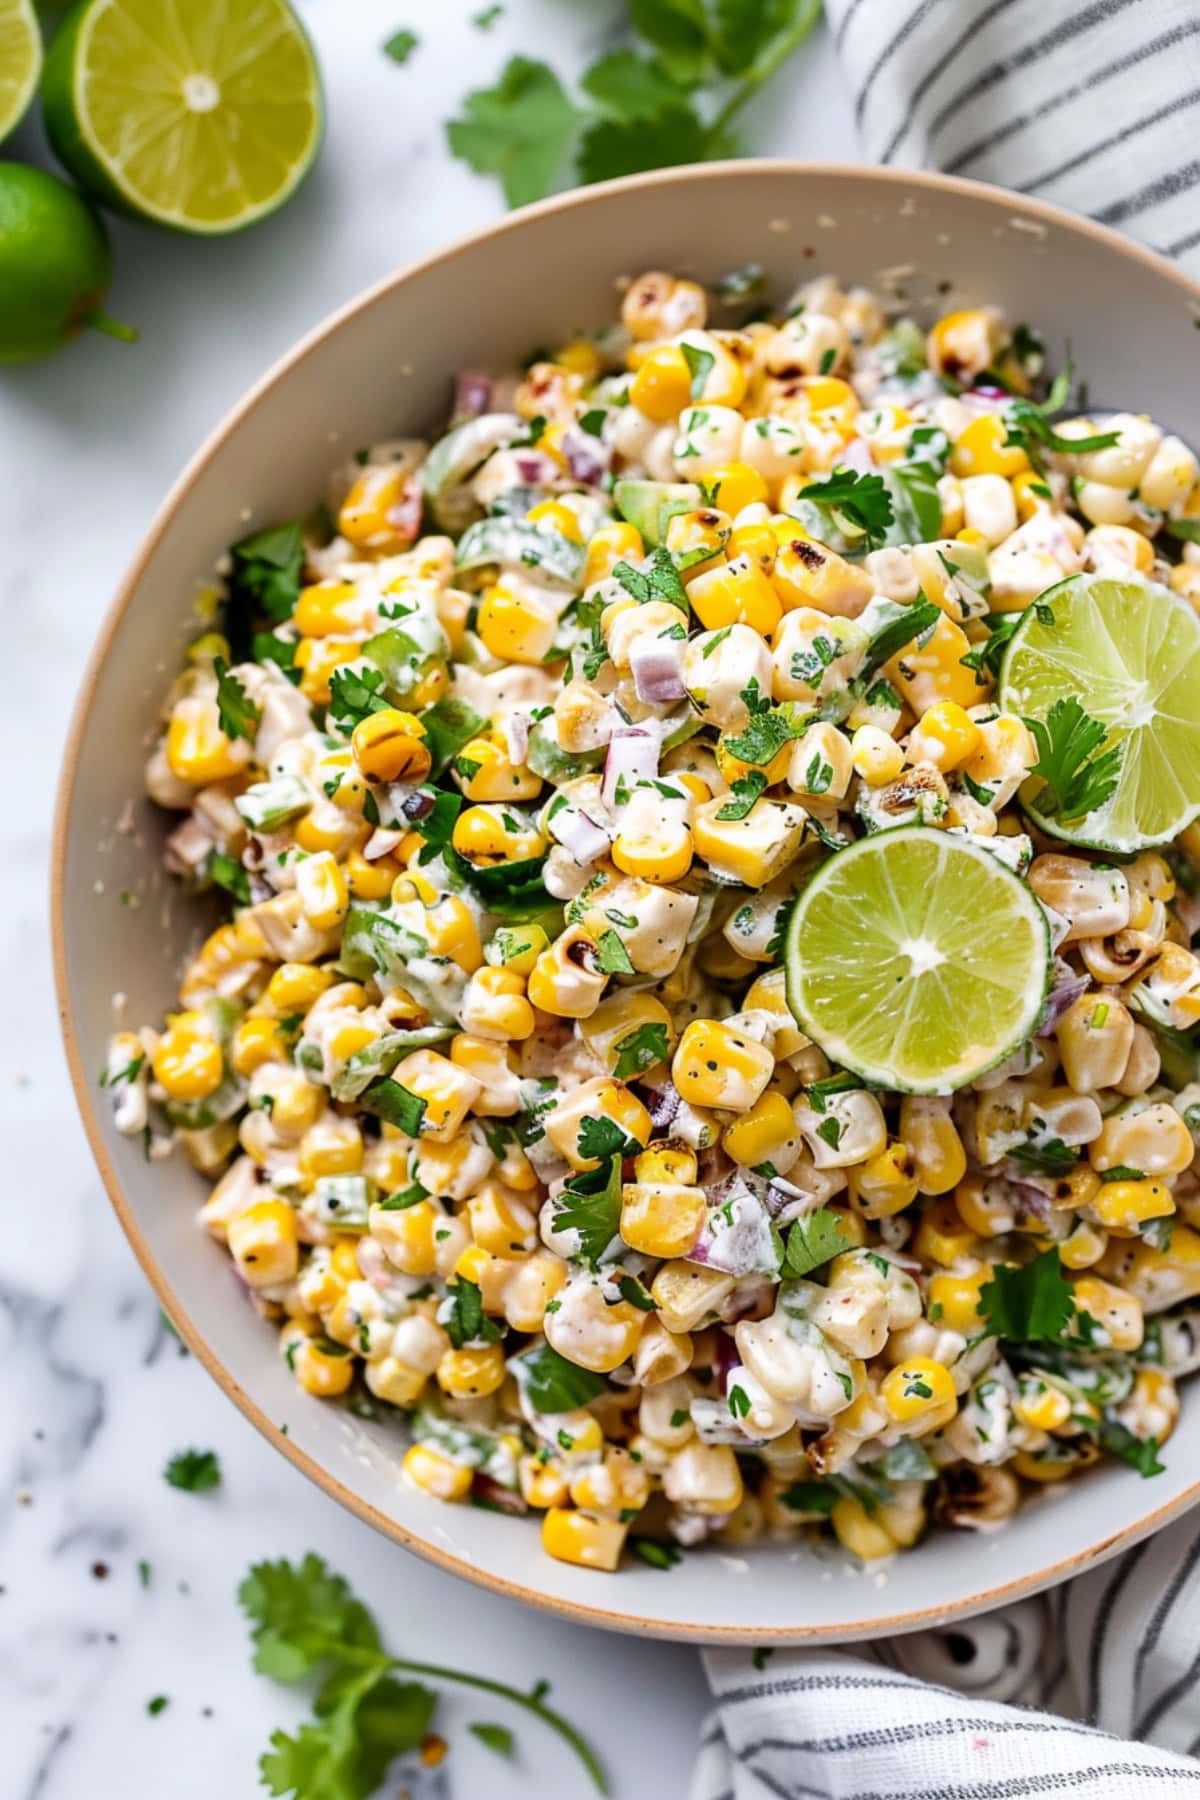 Overhead view of Mexican street corn salad with cilantro, onions, and garnished with lime.